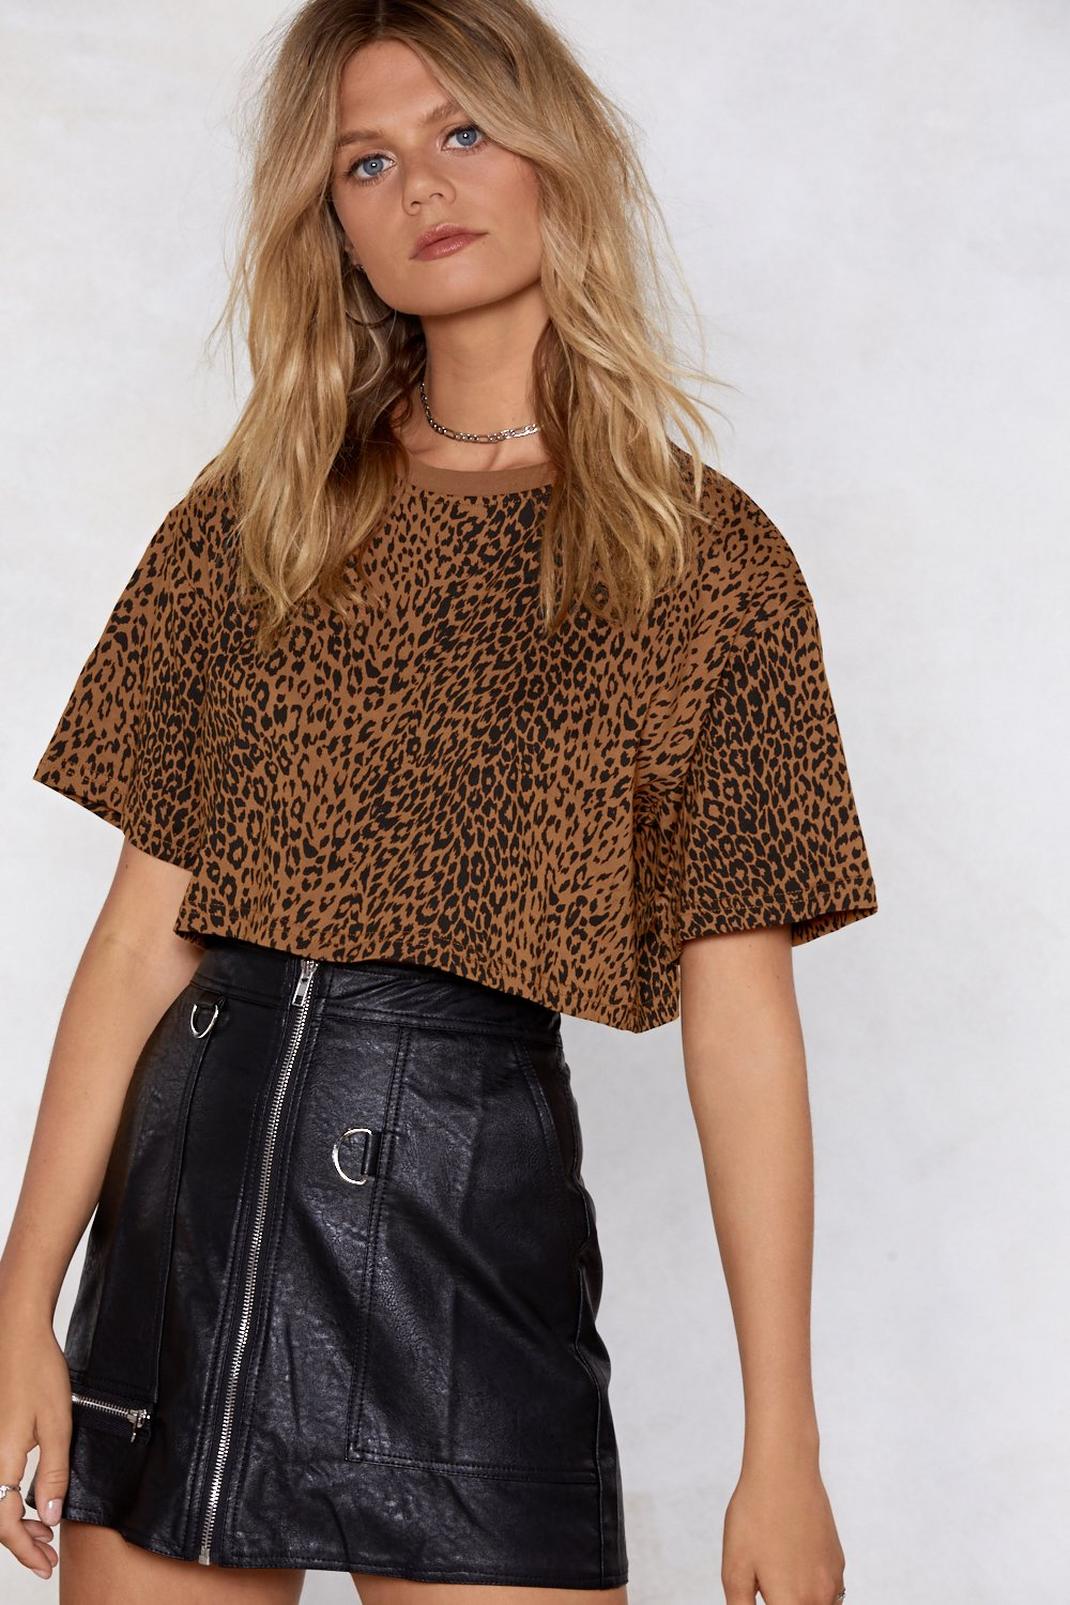 Meow or Never Leopard Tee image number 1